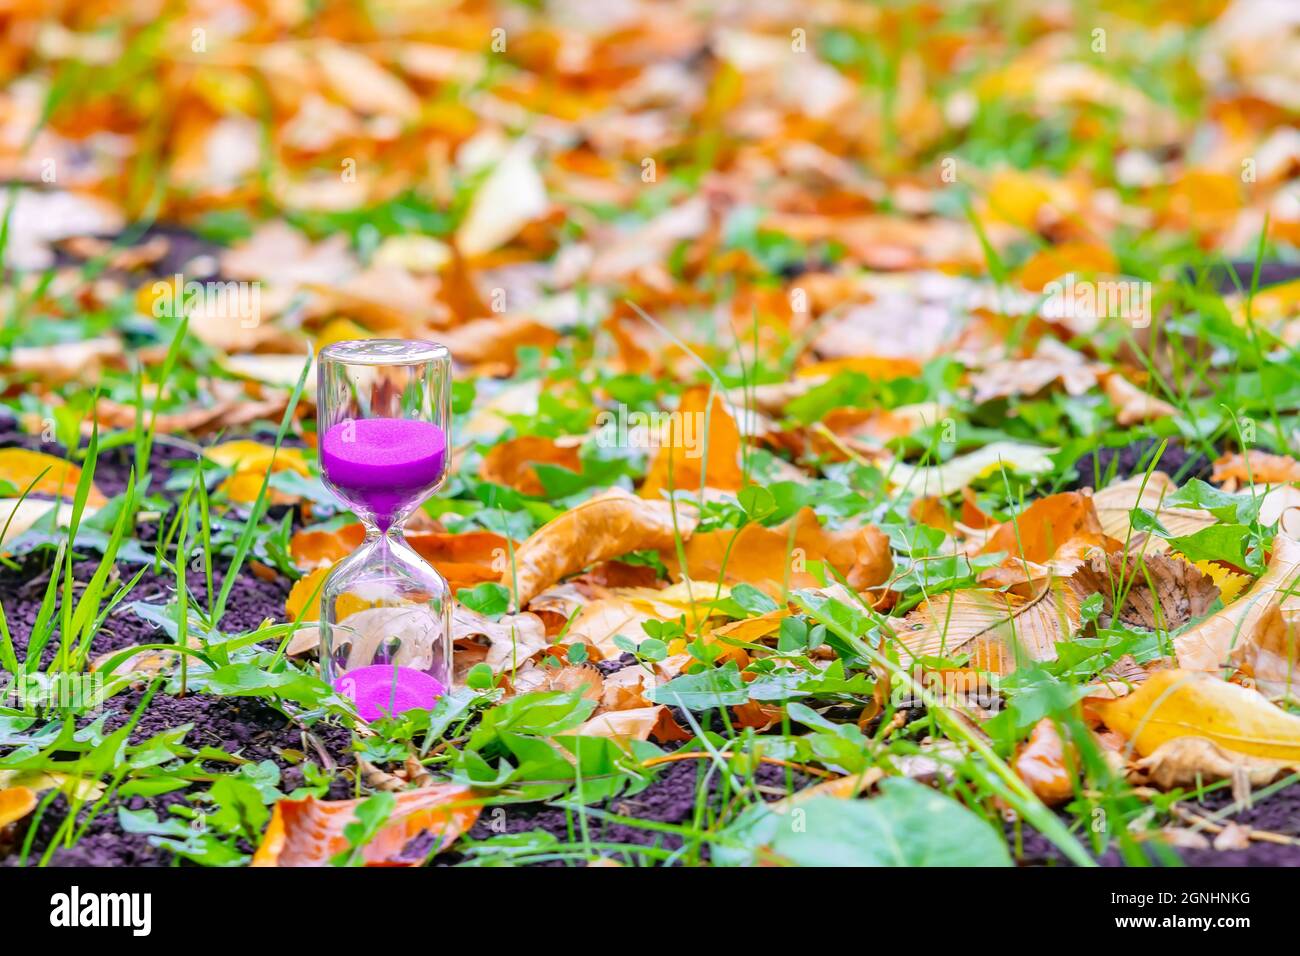 An hourglass stands on the ground among the fallen autumn leaves Stock Photo